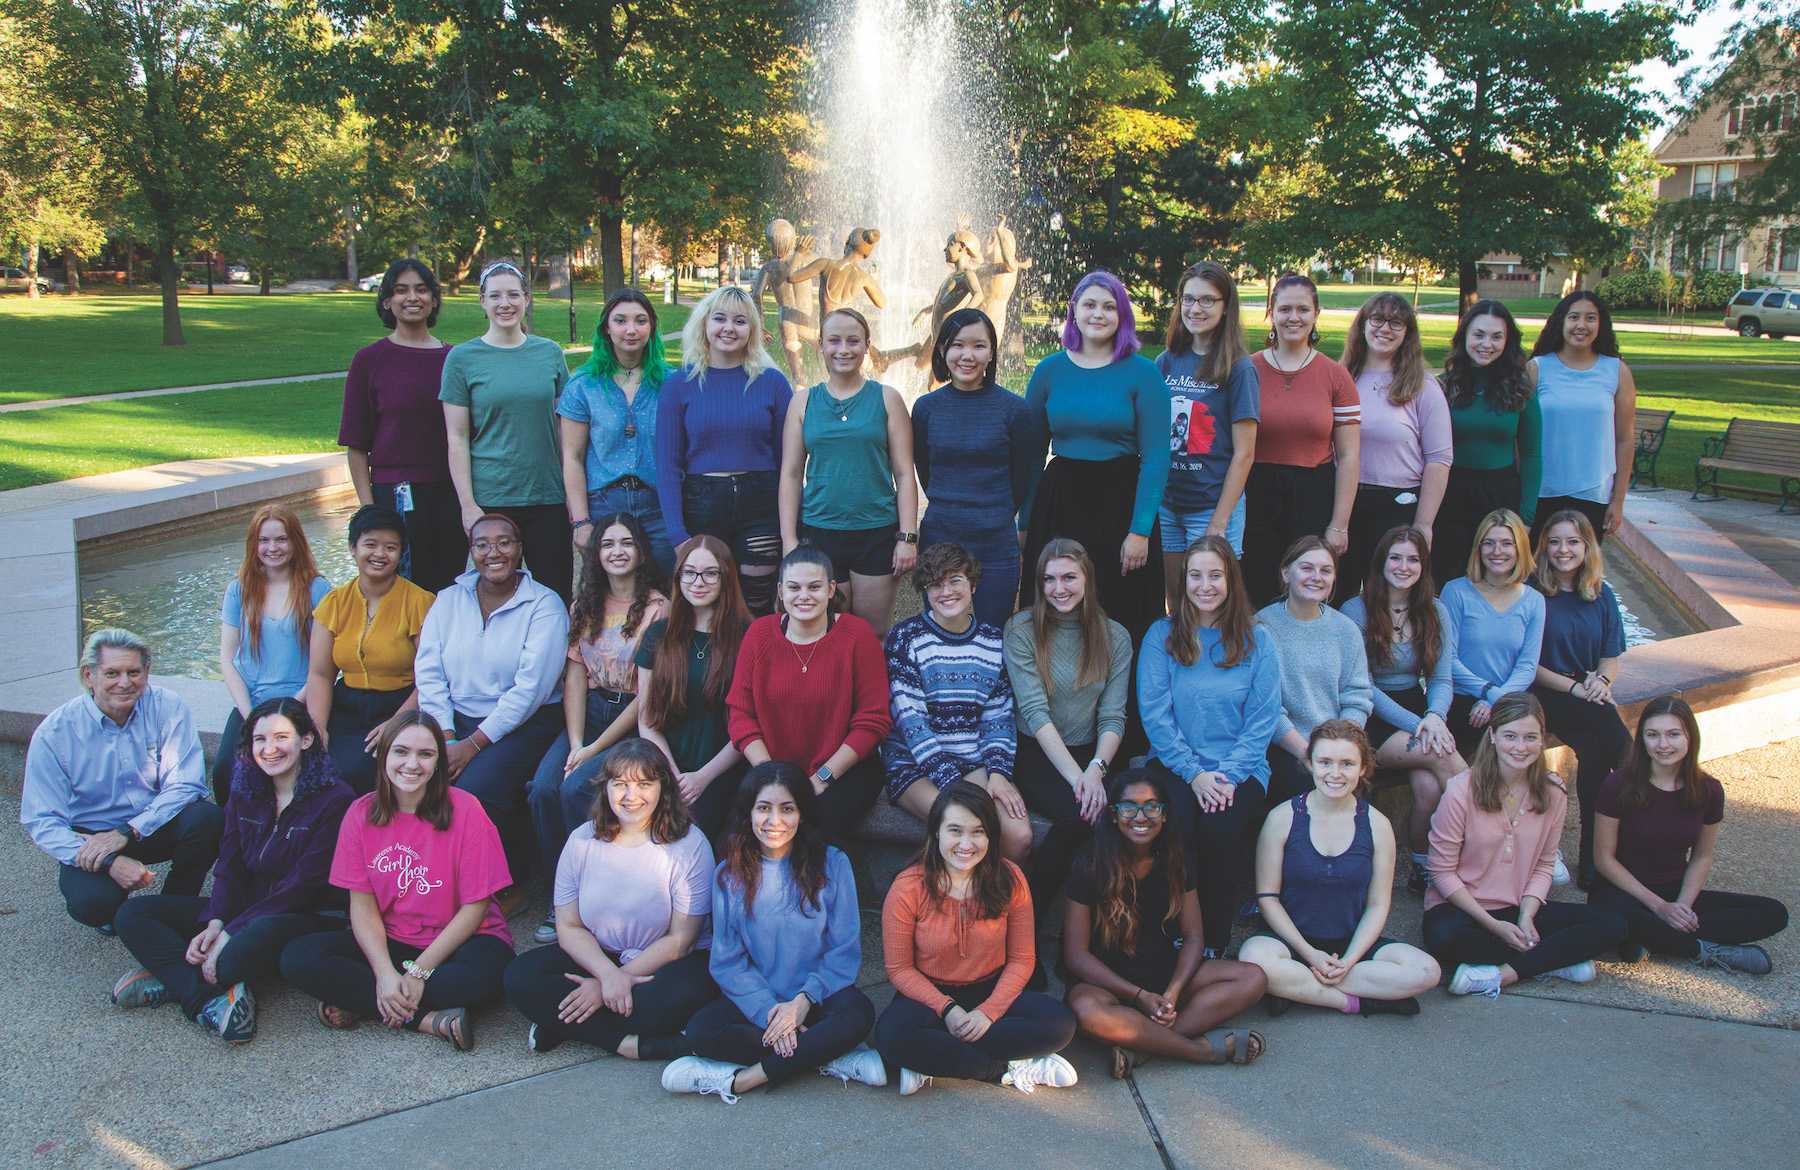 Cantala choir poses for a photo in front of the fountain in City Park.